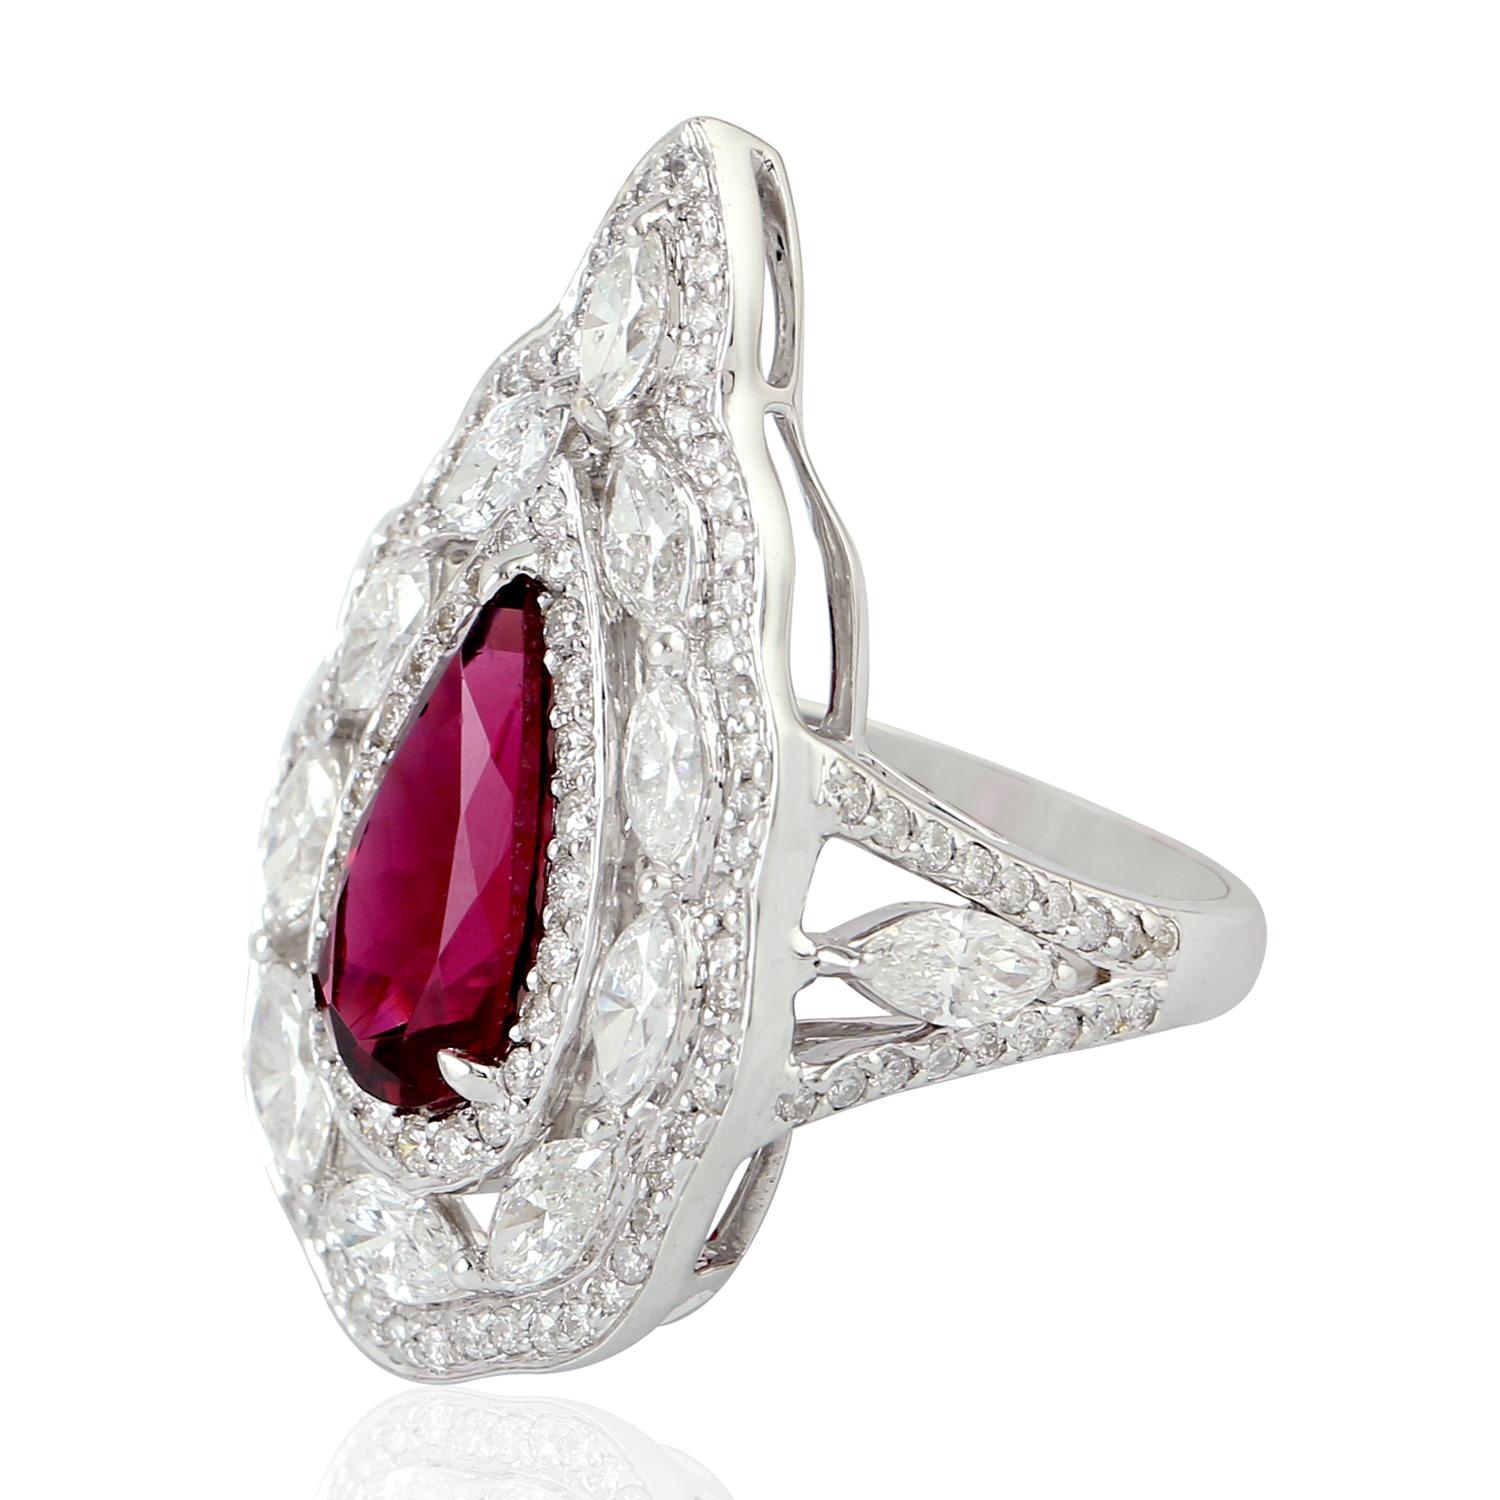 Art Deco Pear Shaped Red Tourmaline Cocktail Ring With Diamonds In 18k White Gold For Sale